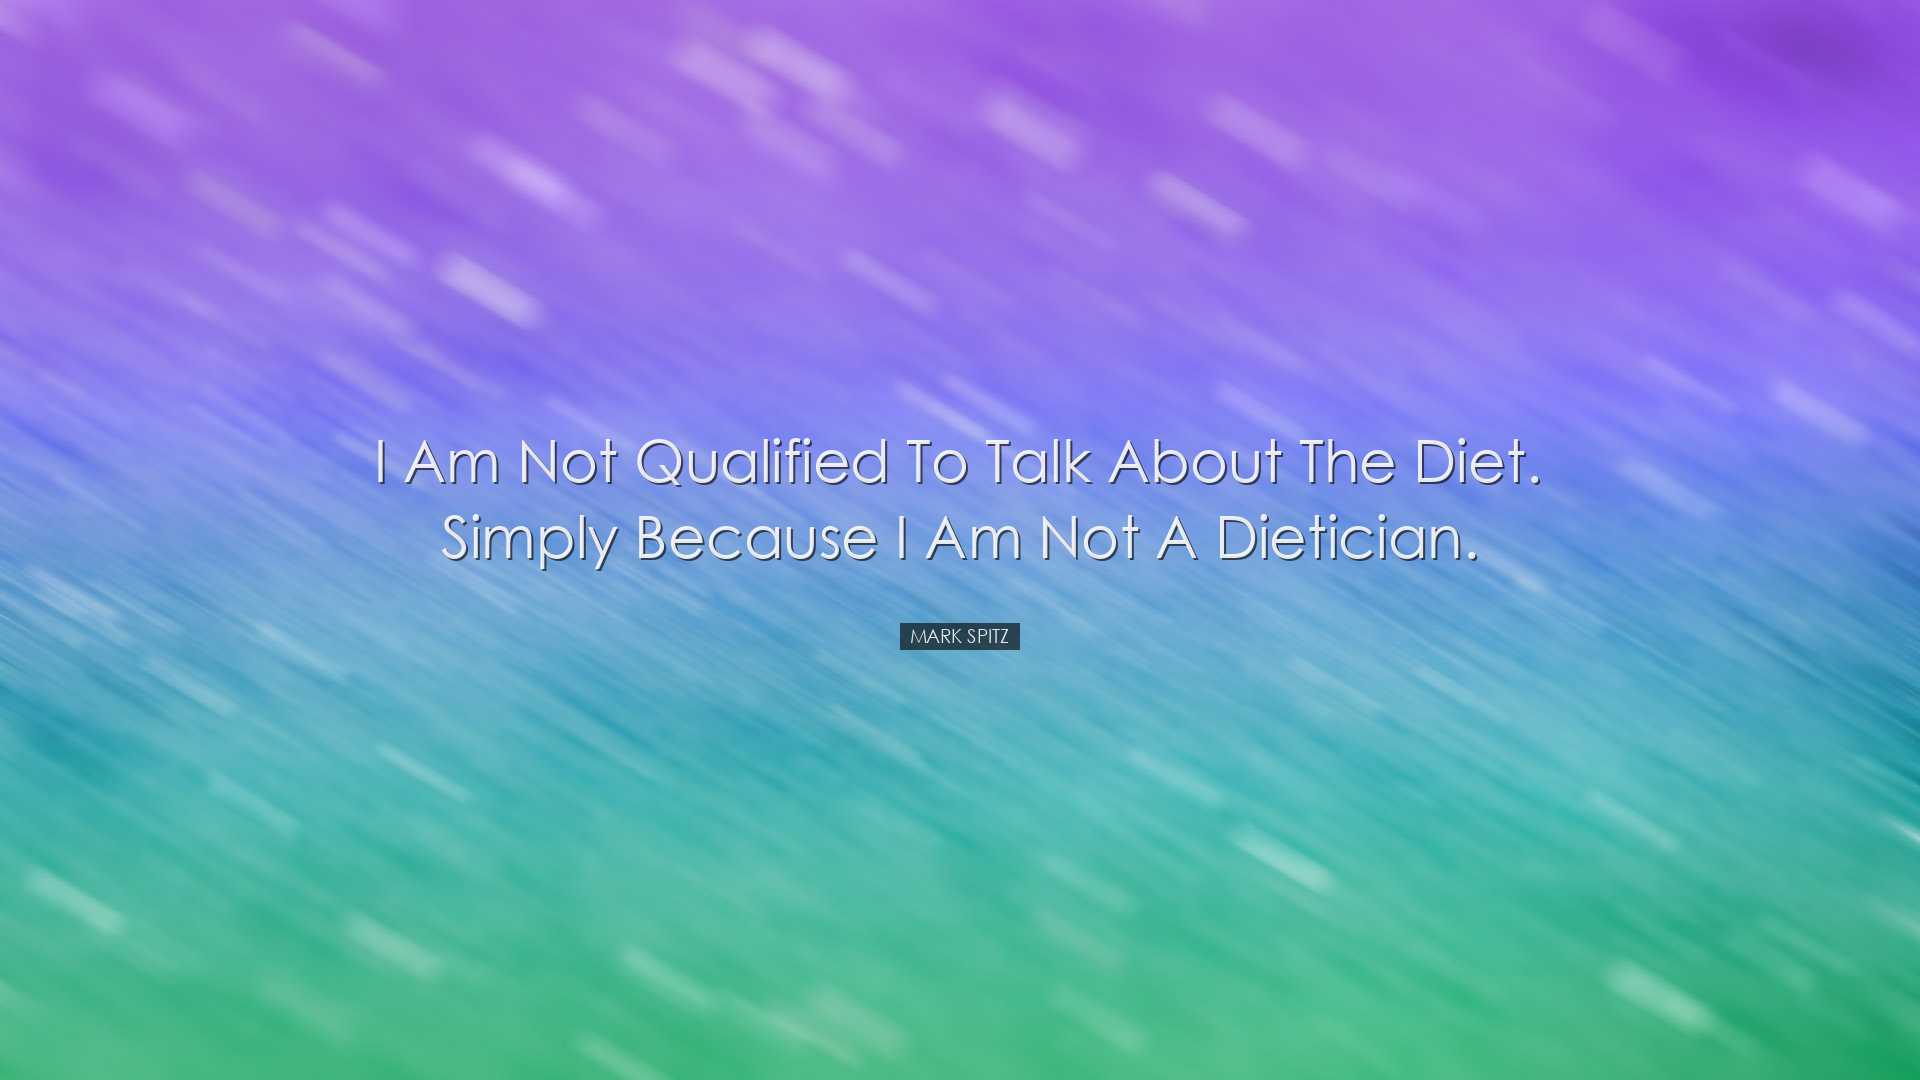 I am not qualified to talk about the diet. Simply because I am not